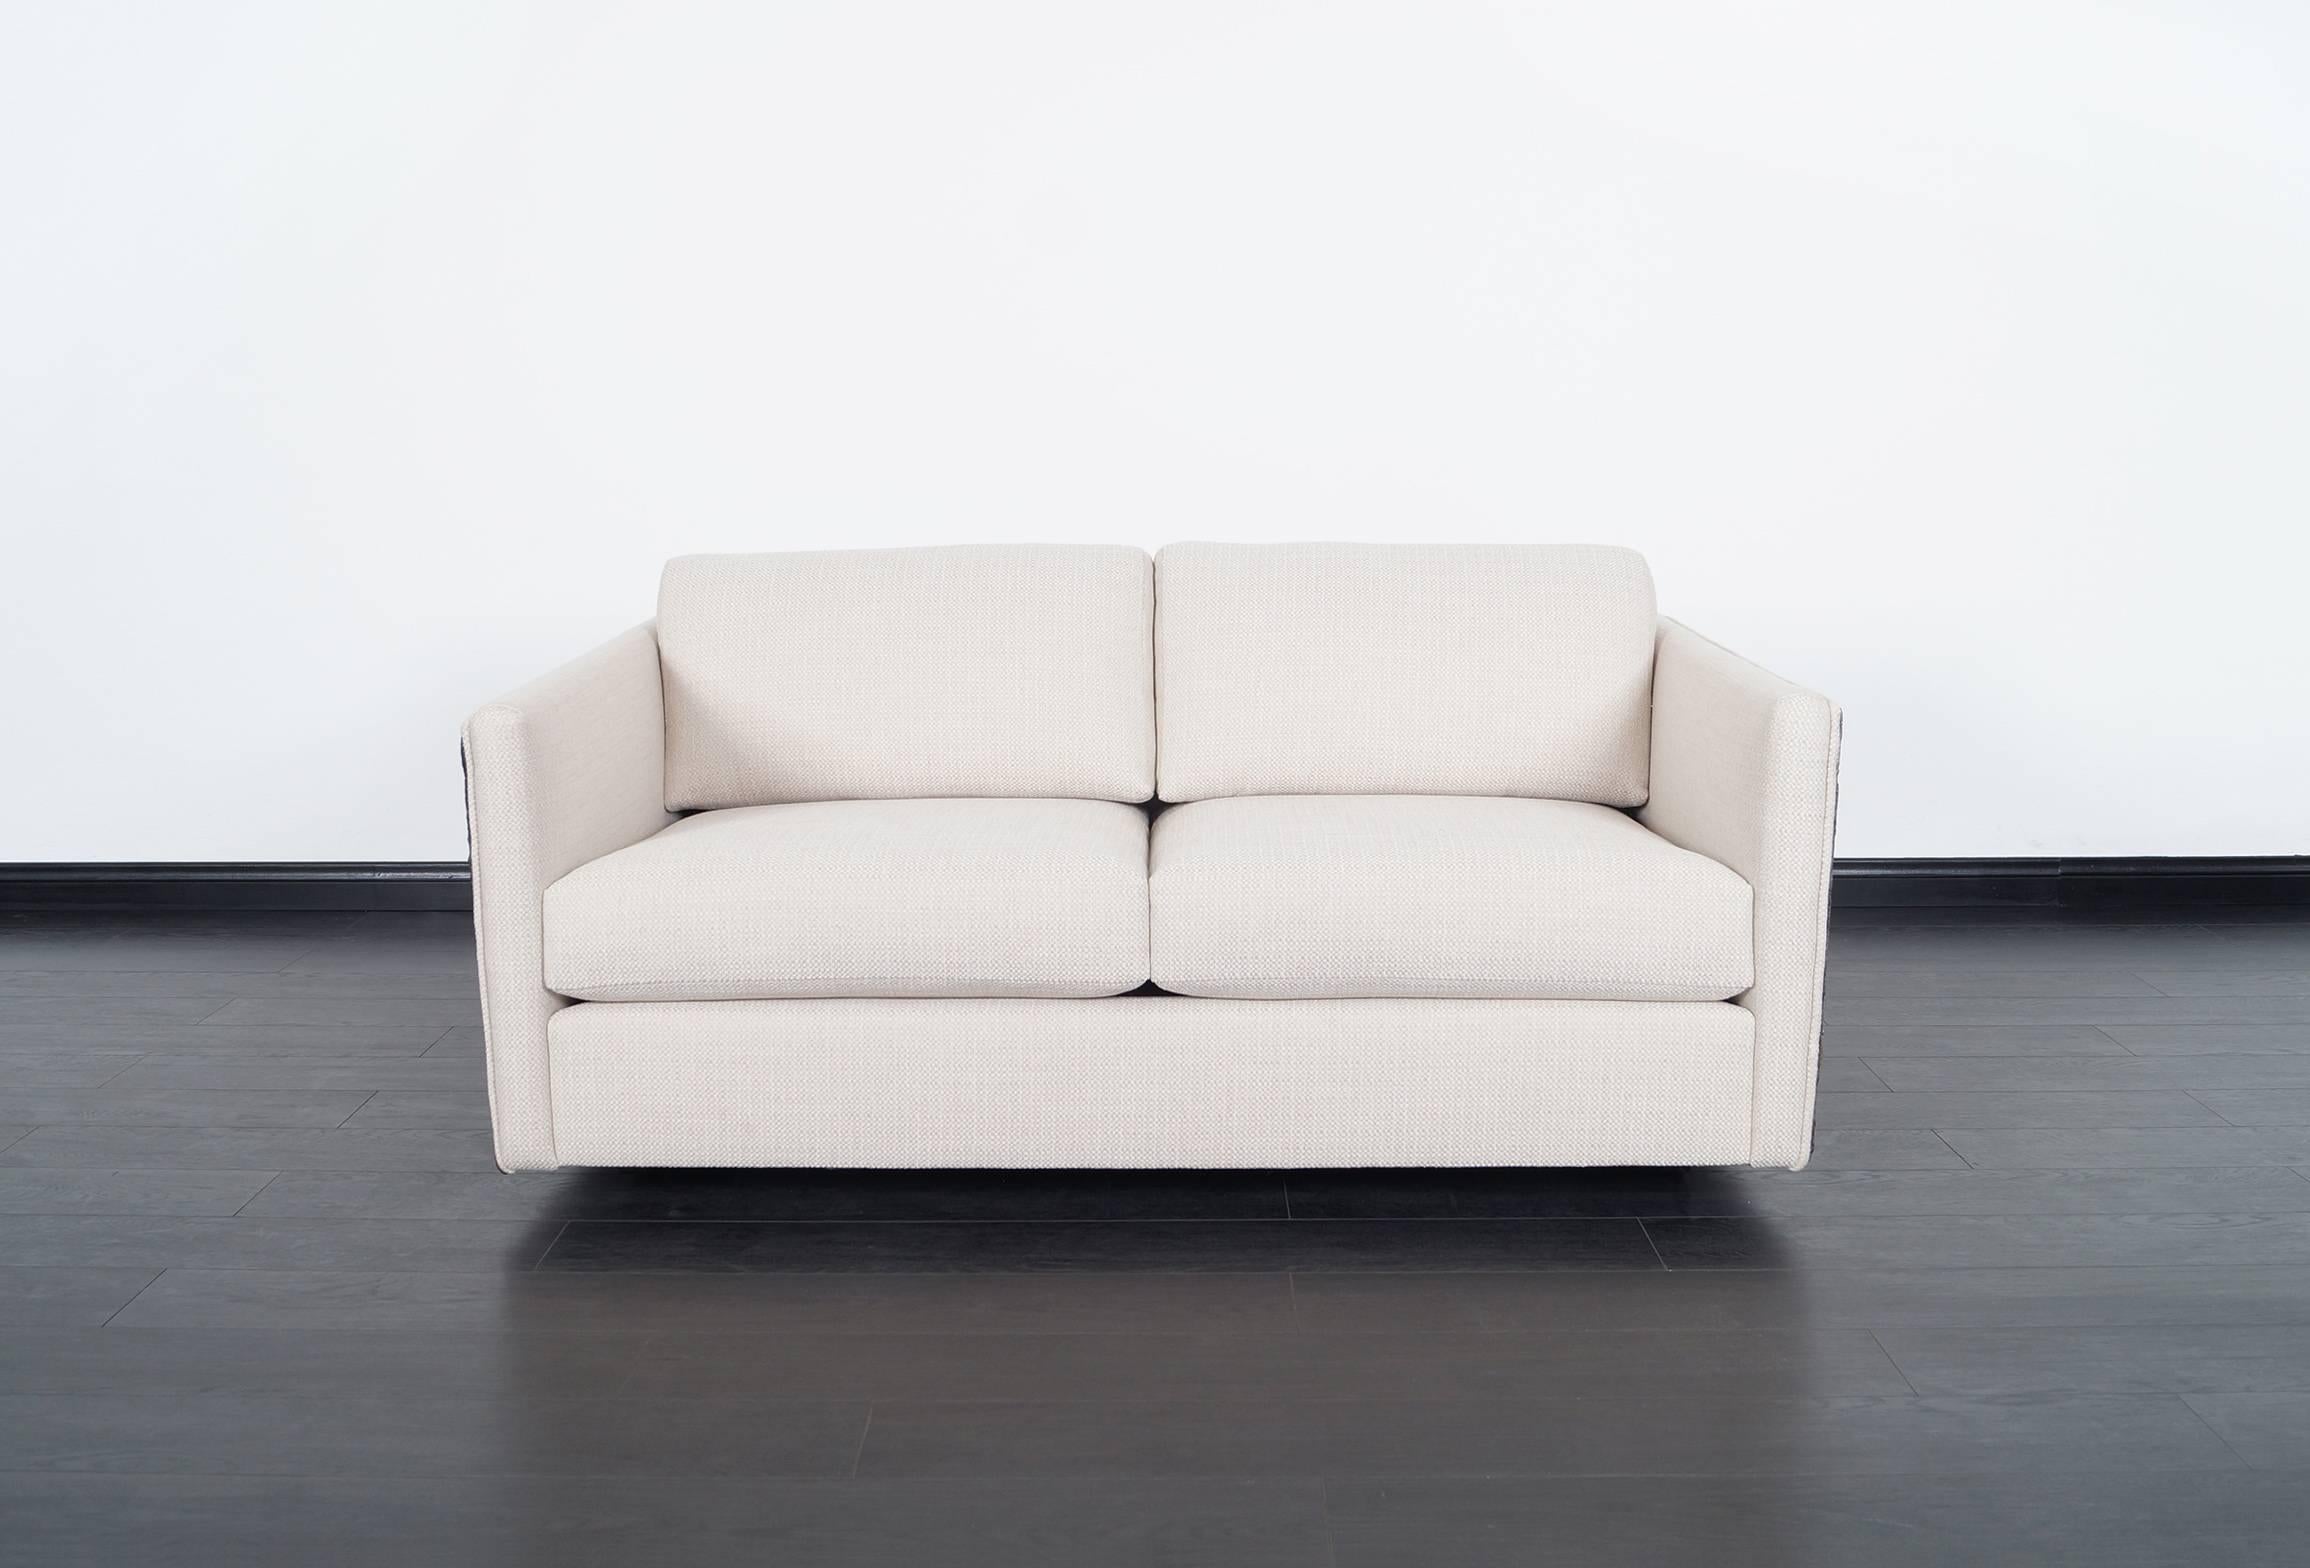 This fabulous Brutalist loveseat was designed by Adrian Pearsall for Craft Associates.